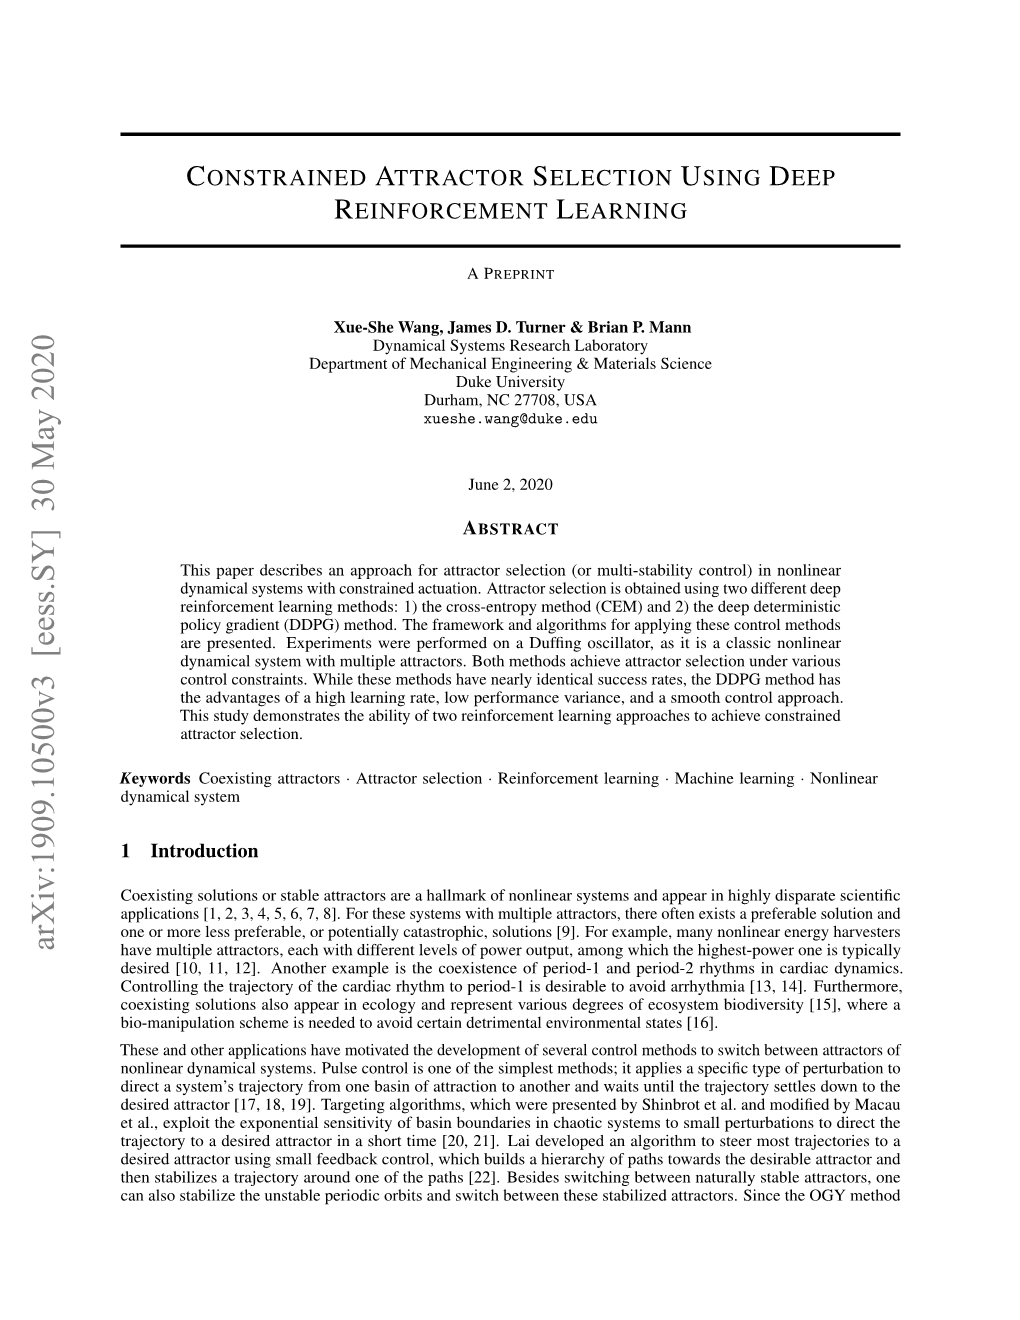 Constrained Attractor Selection Using Deep Reinforcement Learning